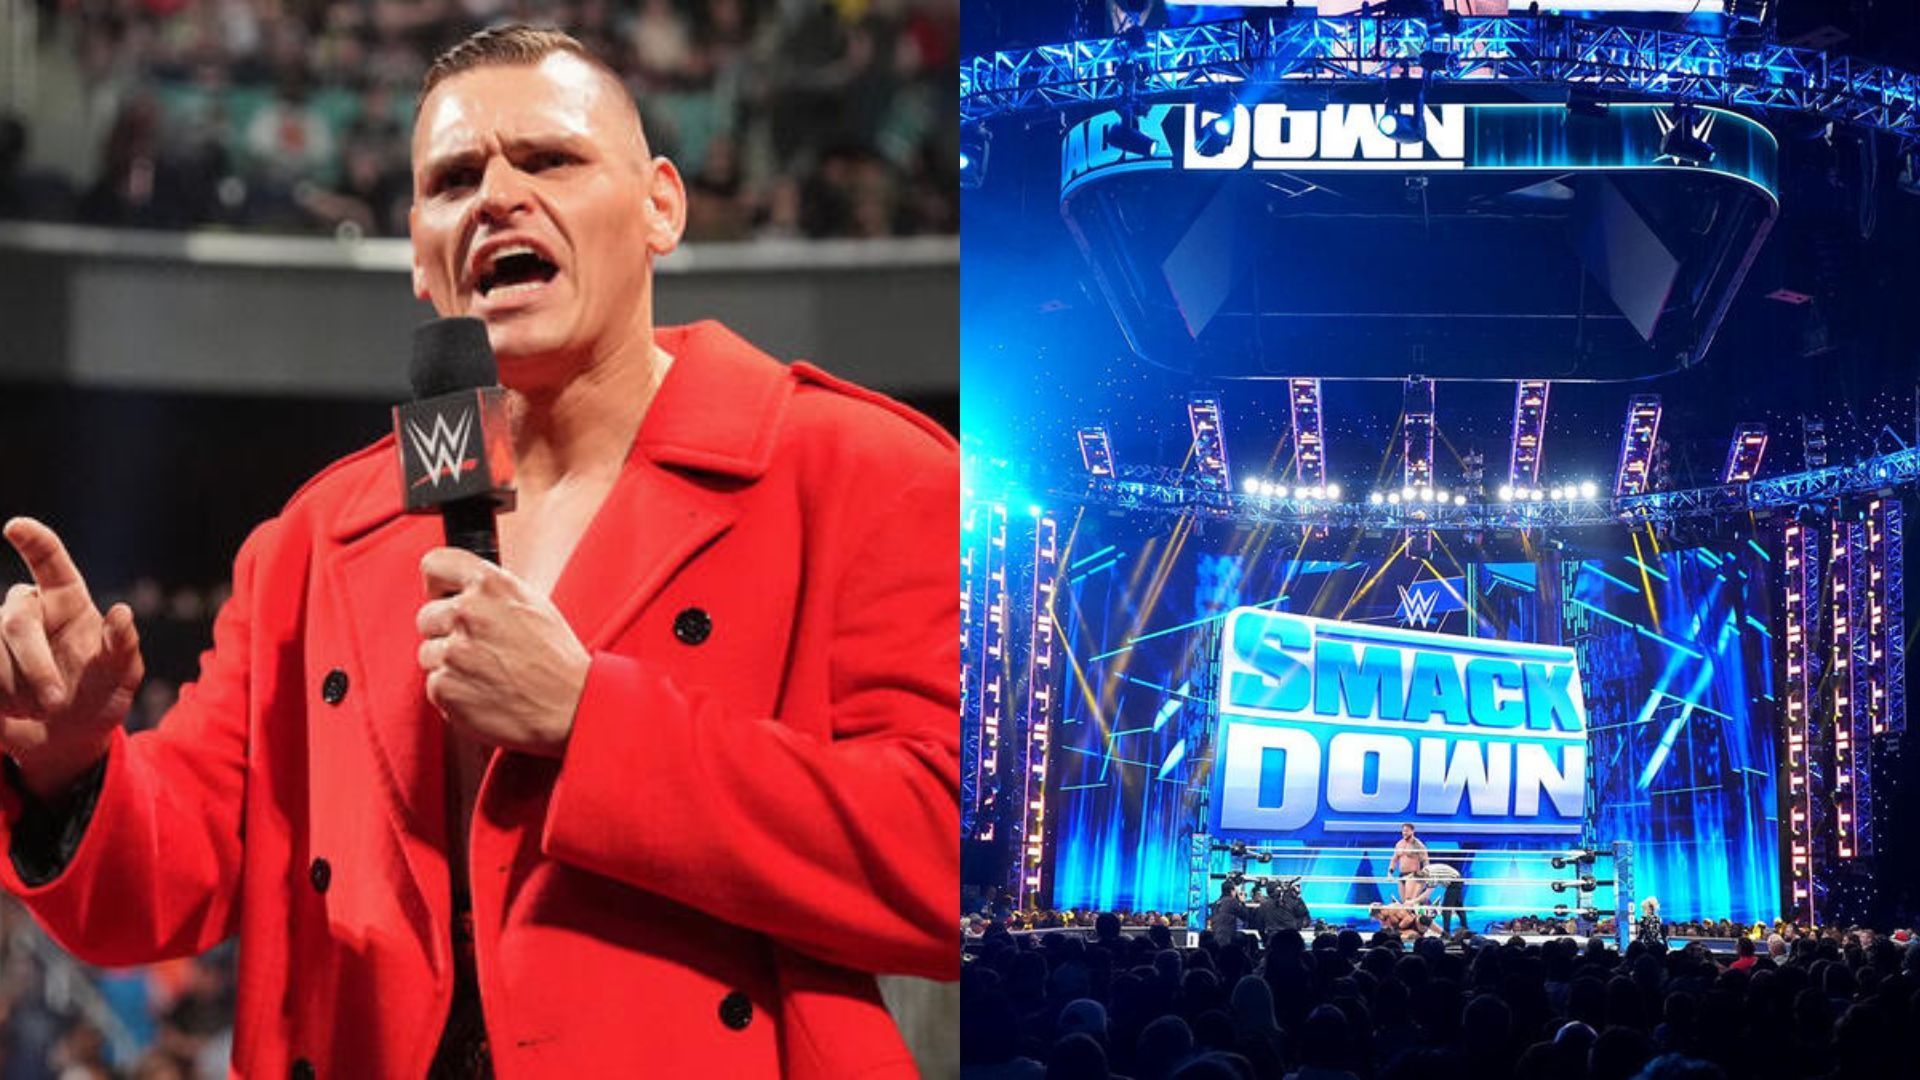 WWE SmackDown this week will be live from the Jeddah Super Dome in Jeddah, Saudi Arabia